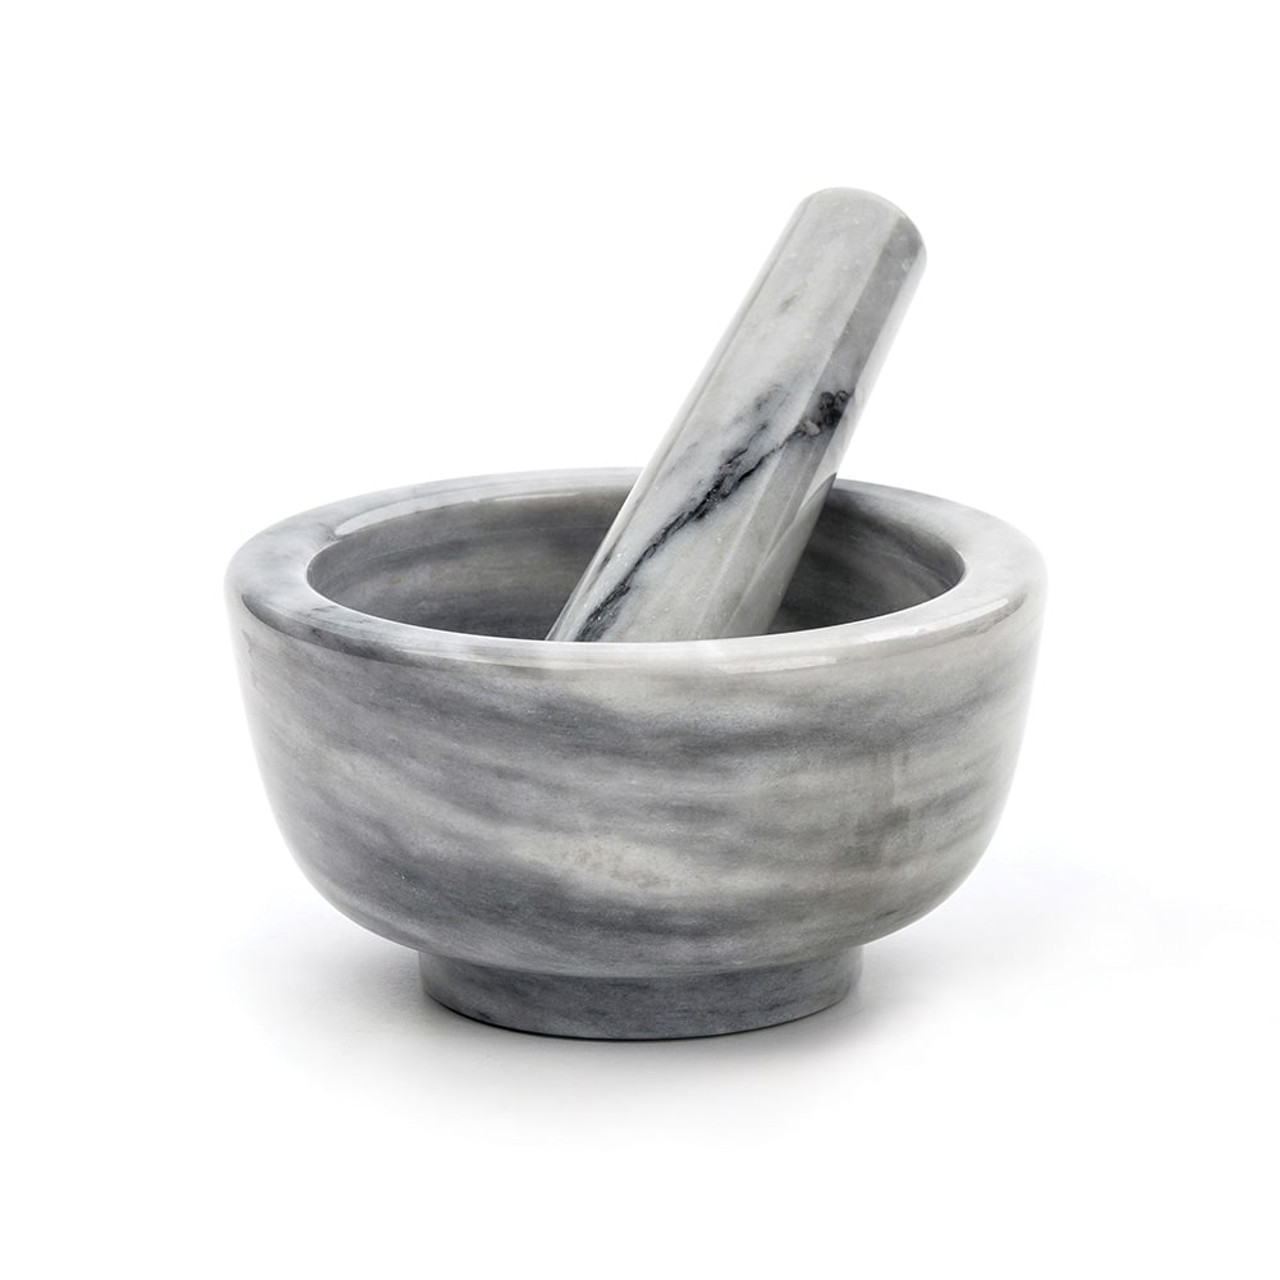 https://cdn11.bigcommerce.com/s-hccytny0od/images/stencil/1280x1280/products/3396/12201/rsvp-white-marble-mortar-pestle__44306.1594541652.jpg?c=2?imbypass=on